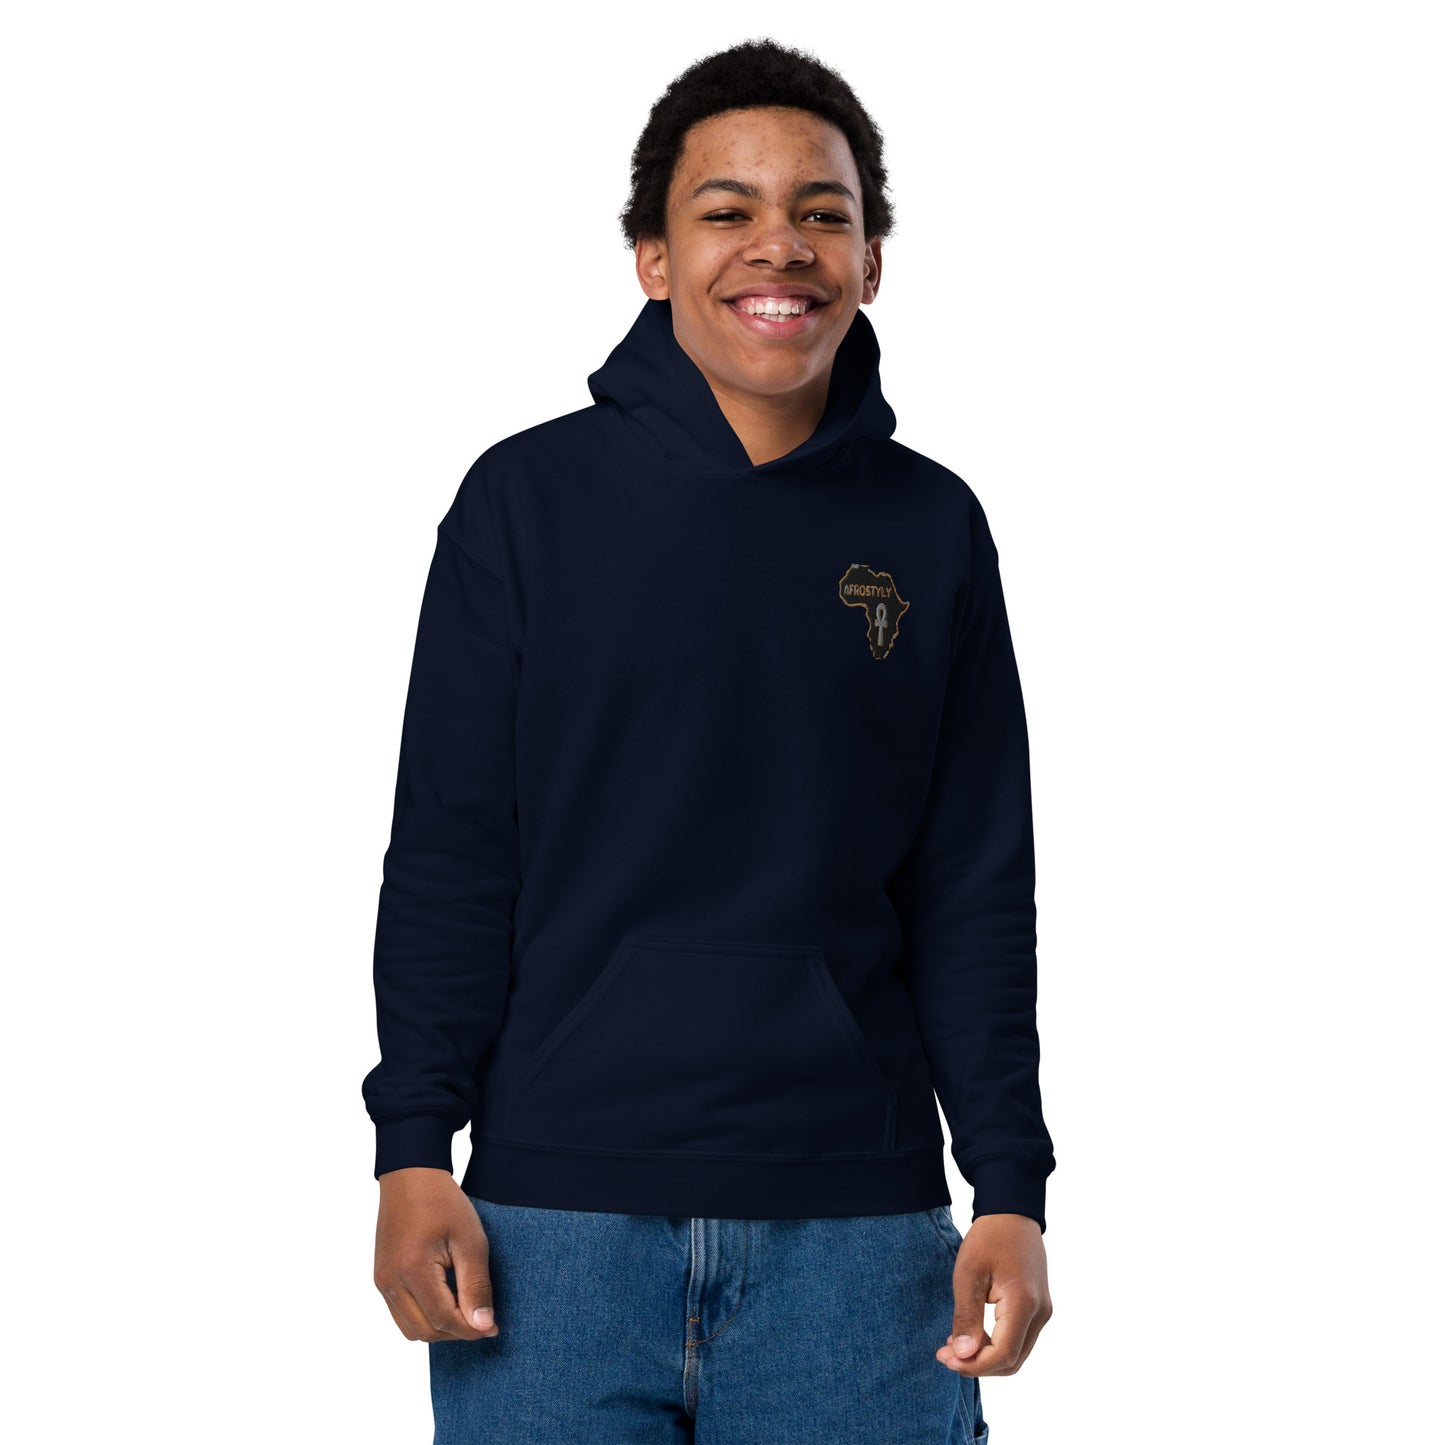 AFROSTYLY Youth heavy blend hoodie